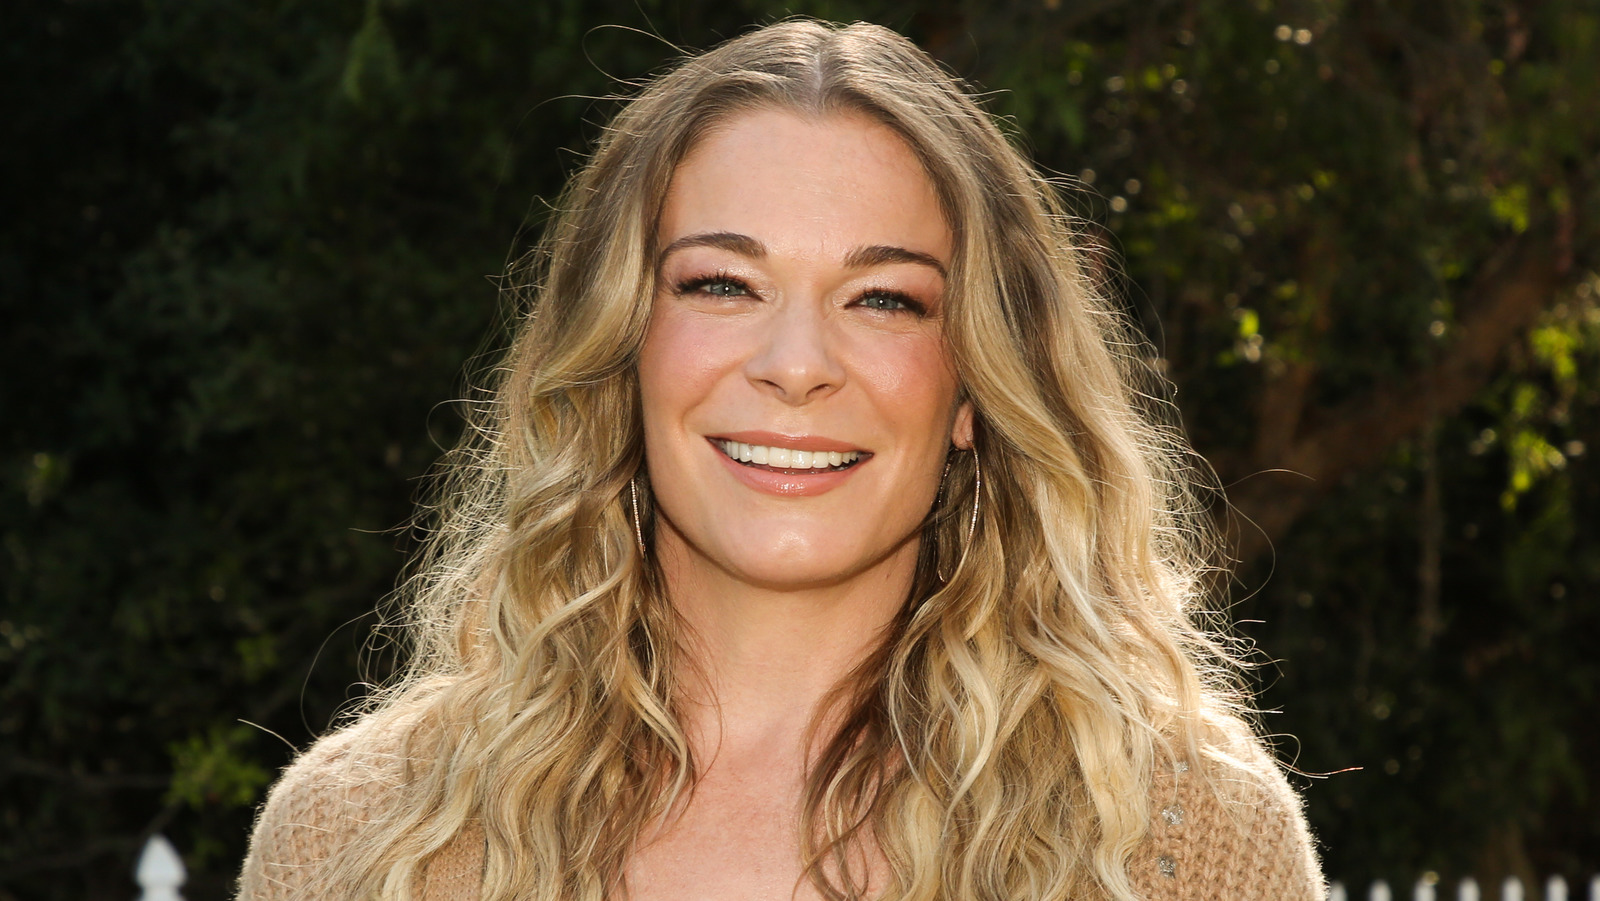 What Really Happened To LeAnn Rimes?